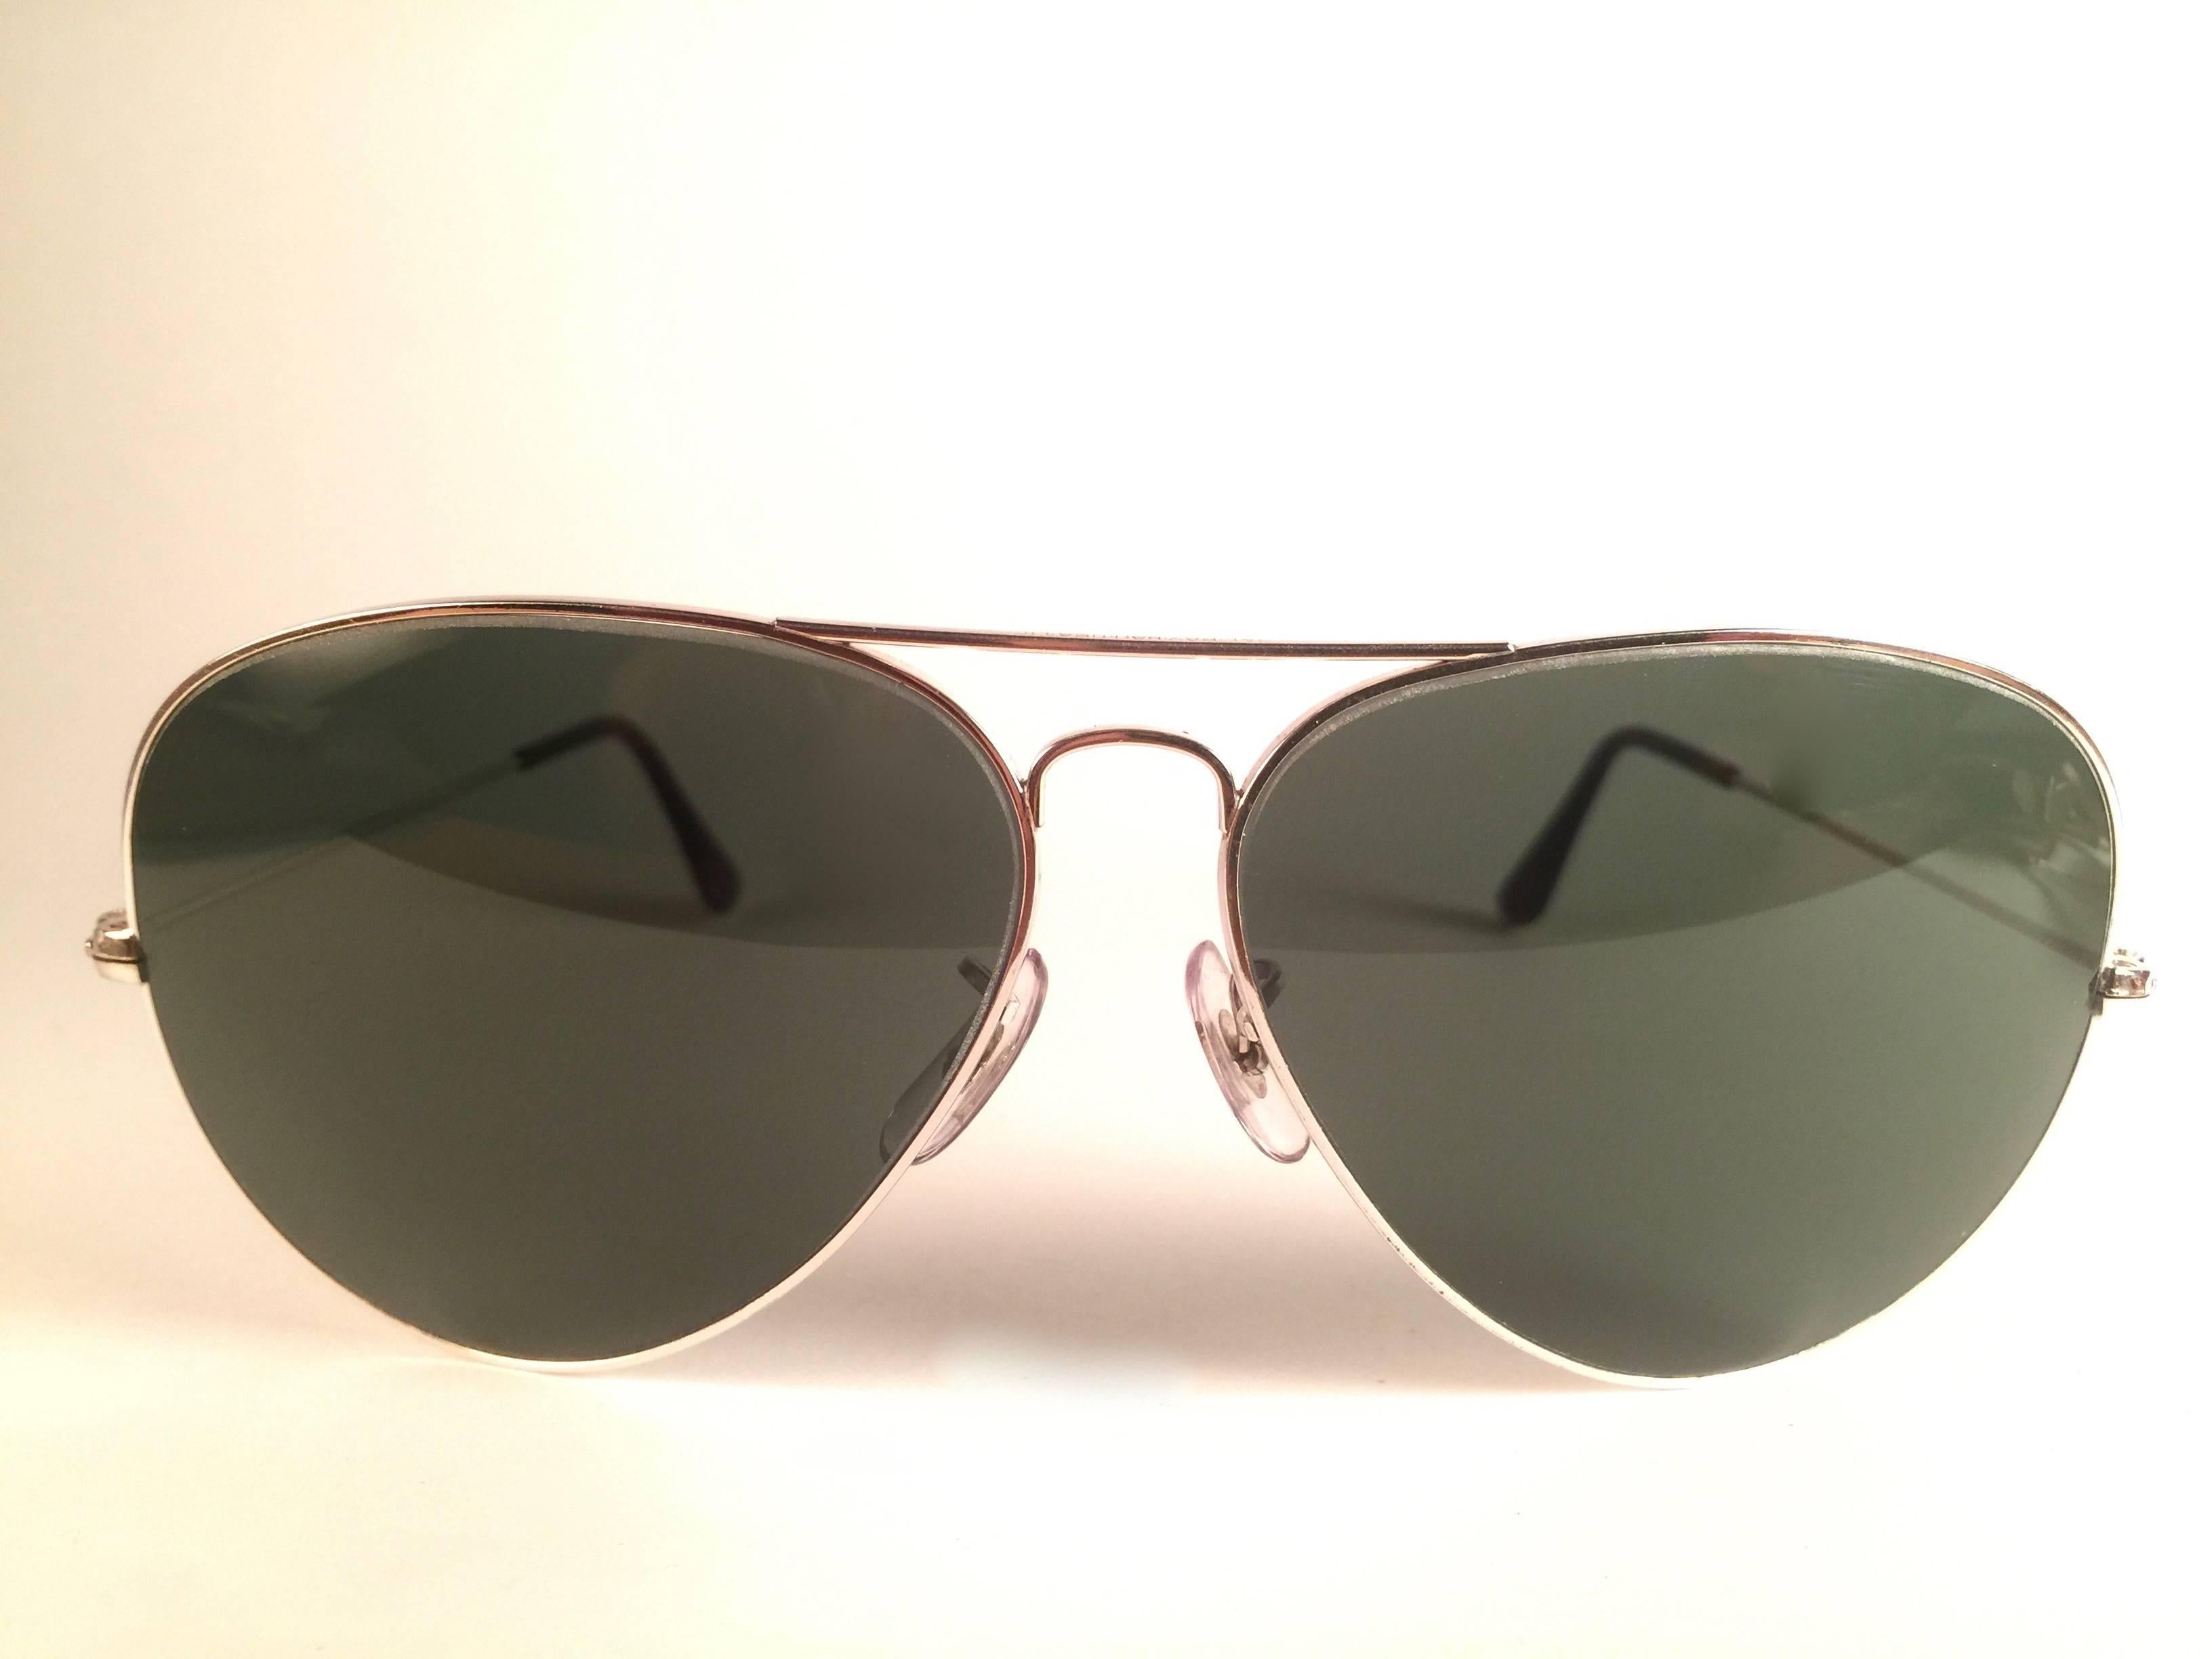 New Super special vintage Ray Ban Aviator White Gold frame with B&L G15 Grey Lenses in SIZE 62!! 
Comes with its original Ray Ban B&L case. 
Rare and hard to find in this new, never worn or displayed condition.